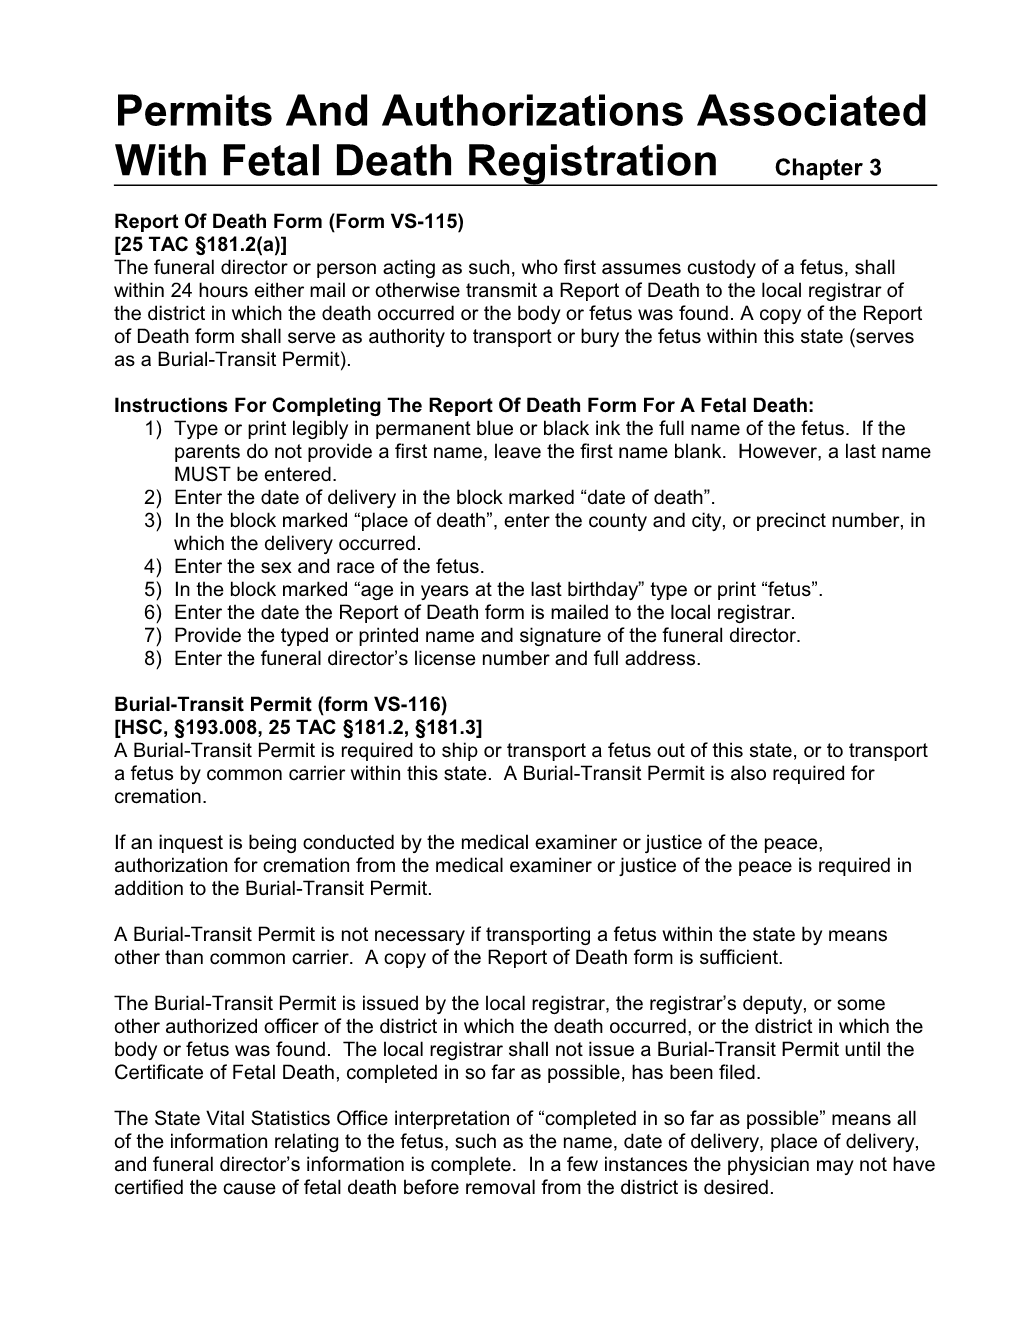 Permits and Authorizations Associated with Fetal Death Registration Chapter 3